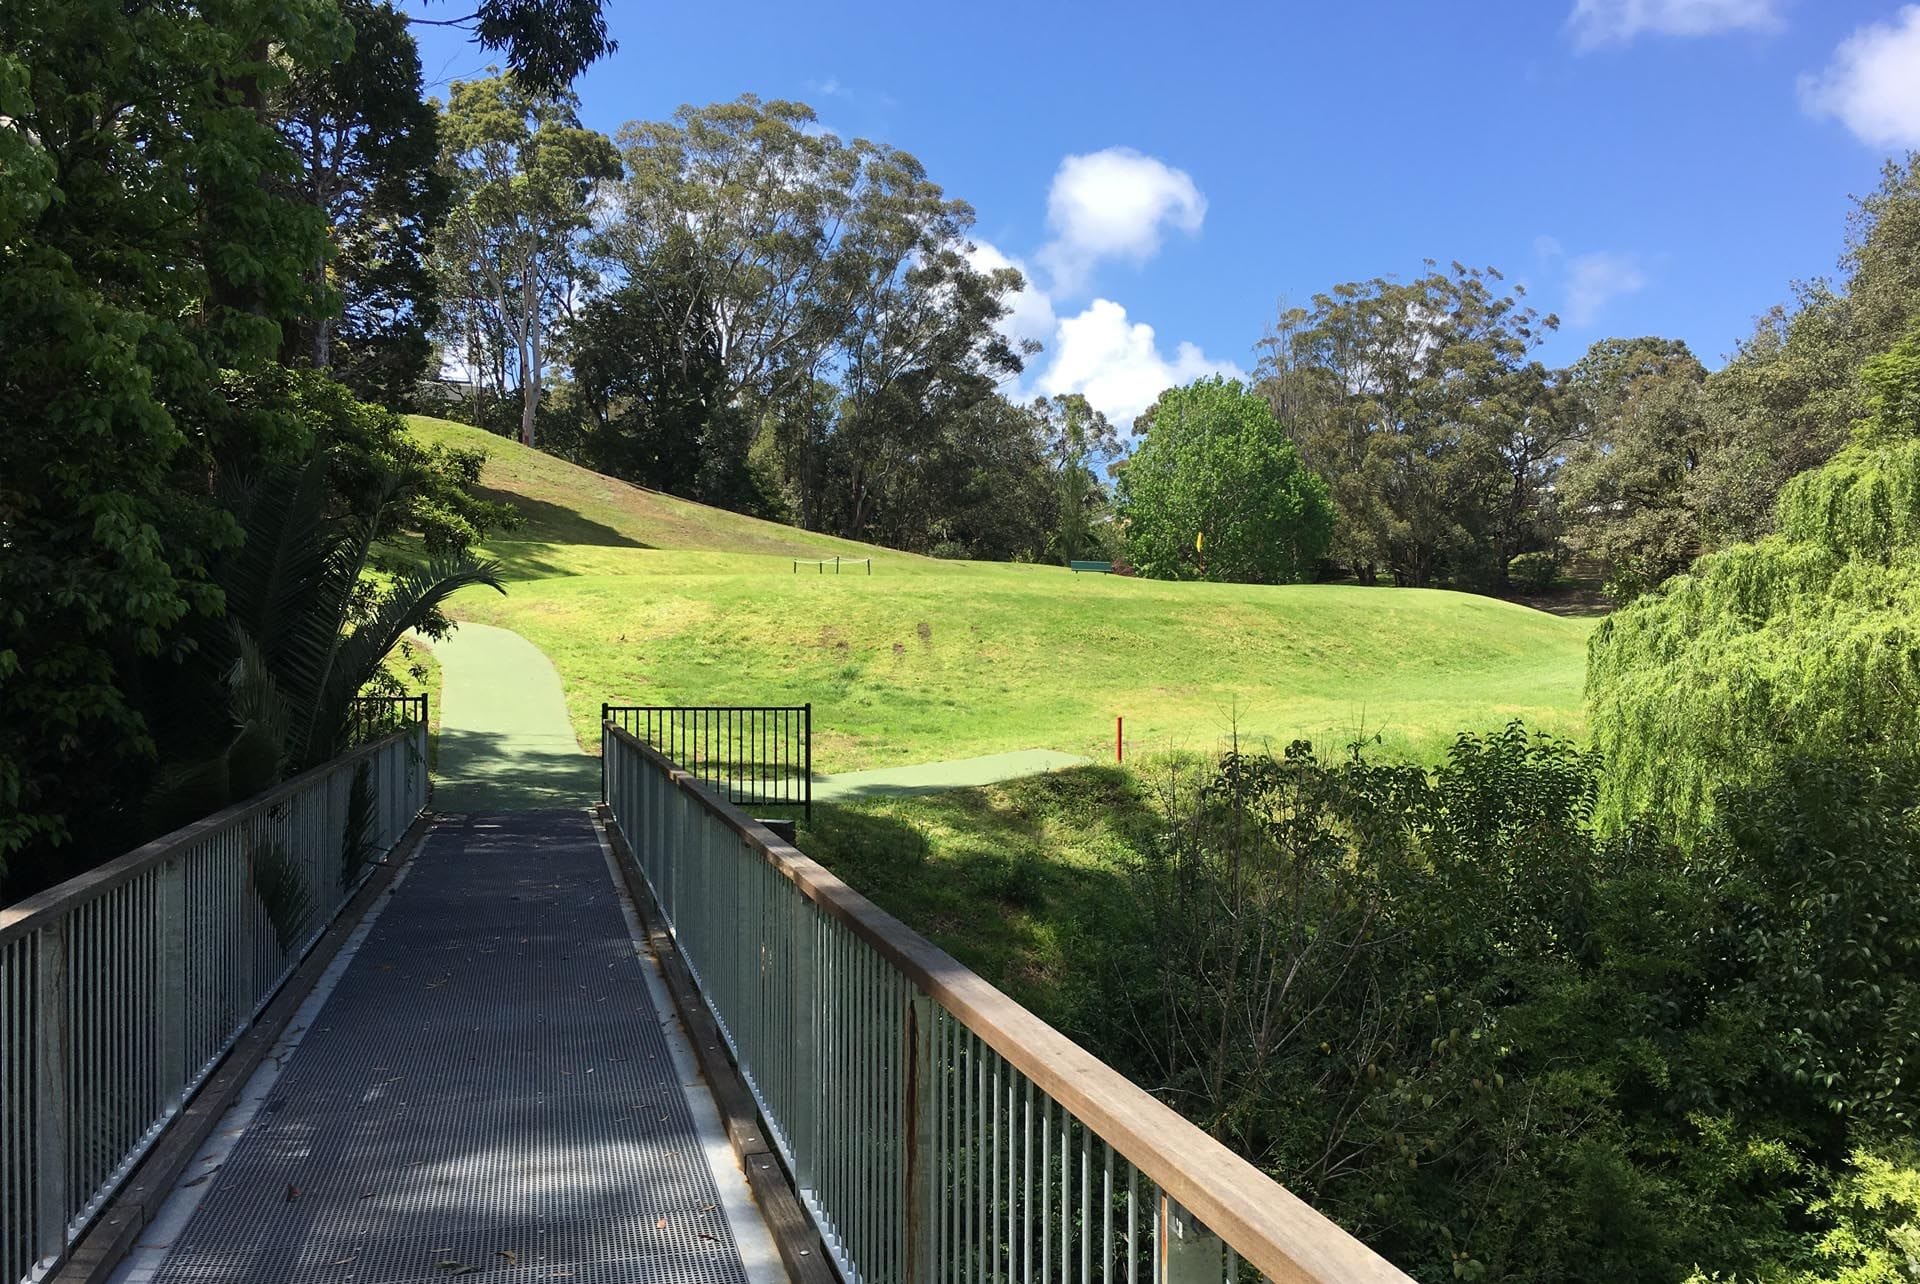 Lane Cove Golf Course by Synthetic Grass & Rubber Surfaces Image -5bce4567dc511